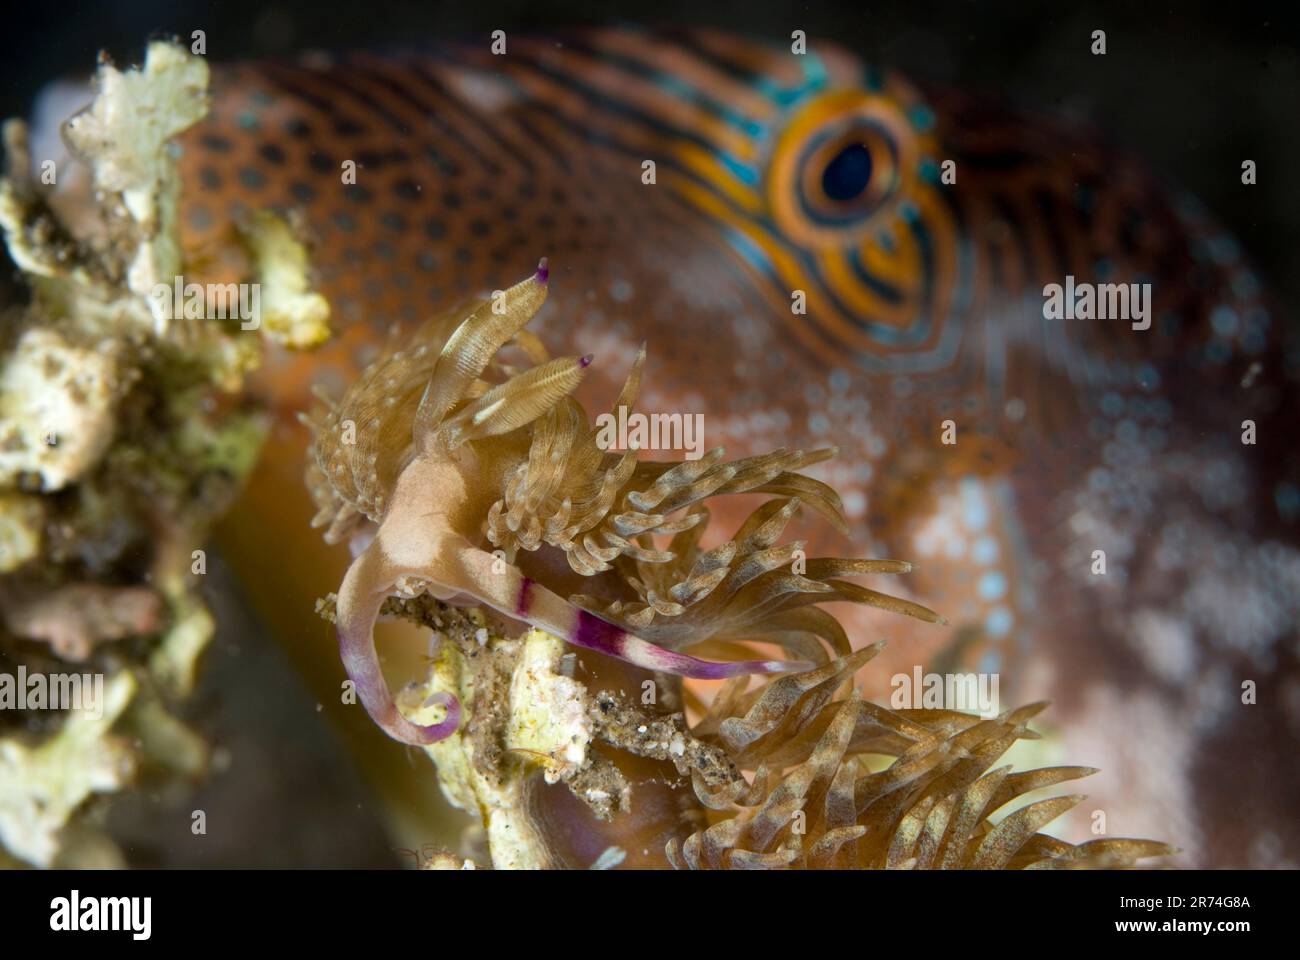 Aeolid Nudibranch, Pteraeolidia ianthina, with Spotted Toby, Canthigaster solandri, in background, Serena Besar dive site, Lembeh Straits, Sulawesi, I Stock Photo